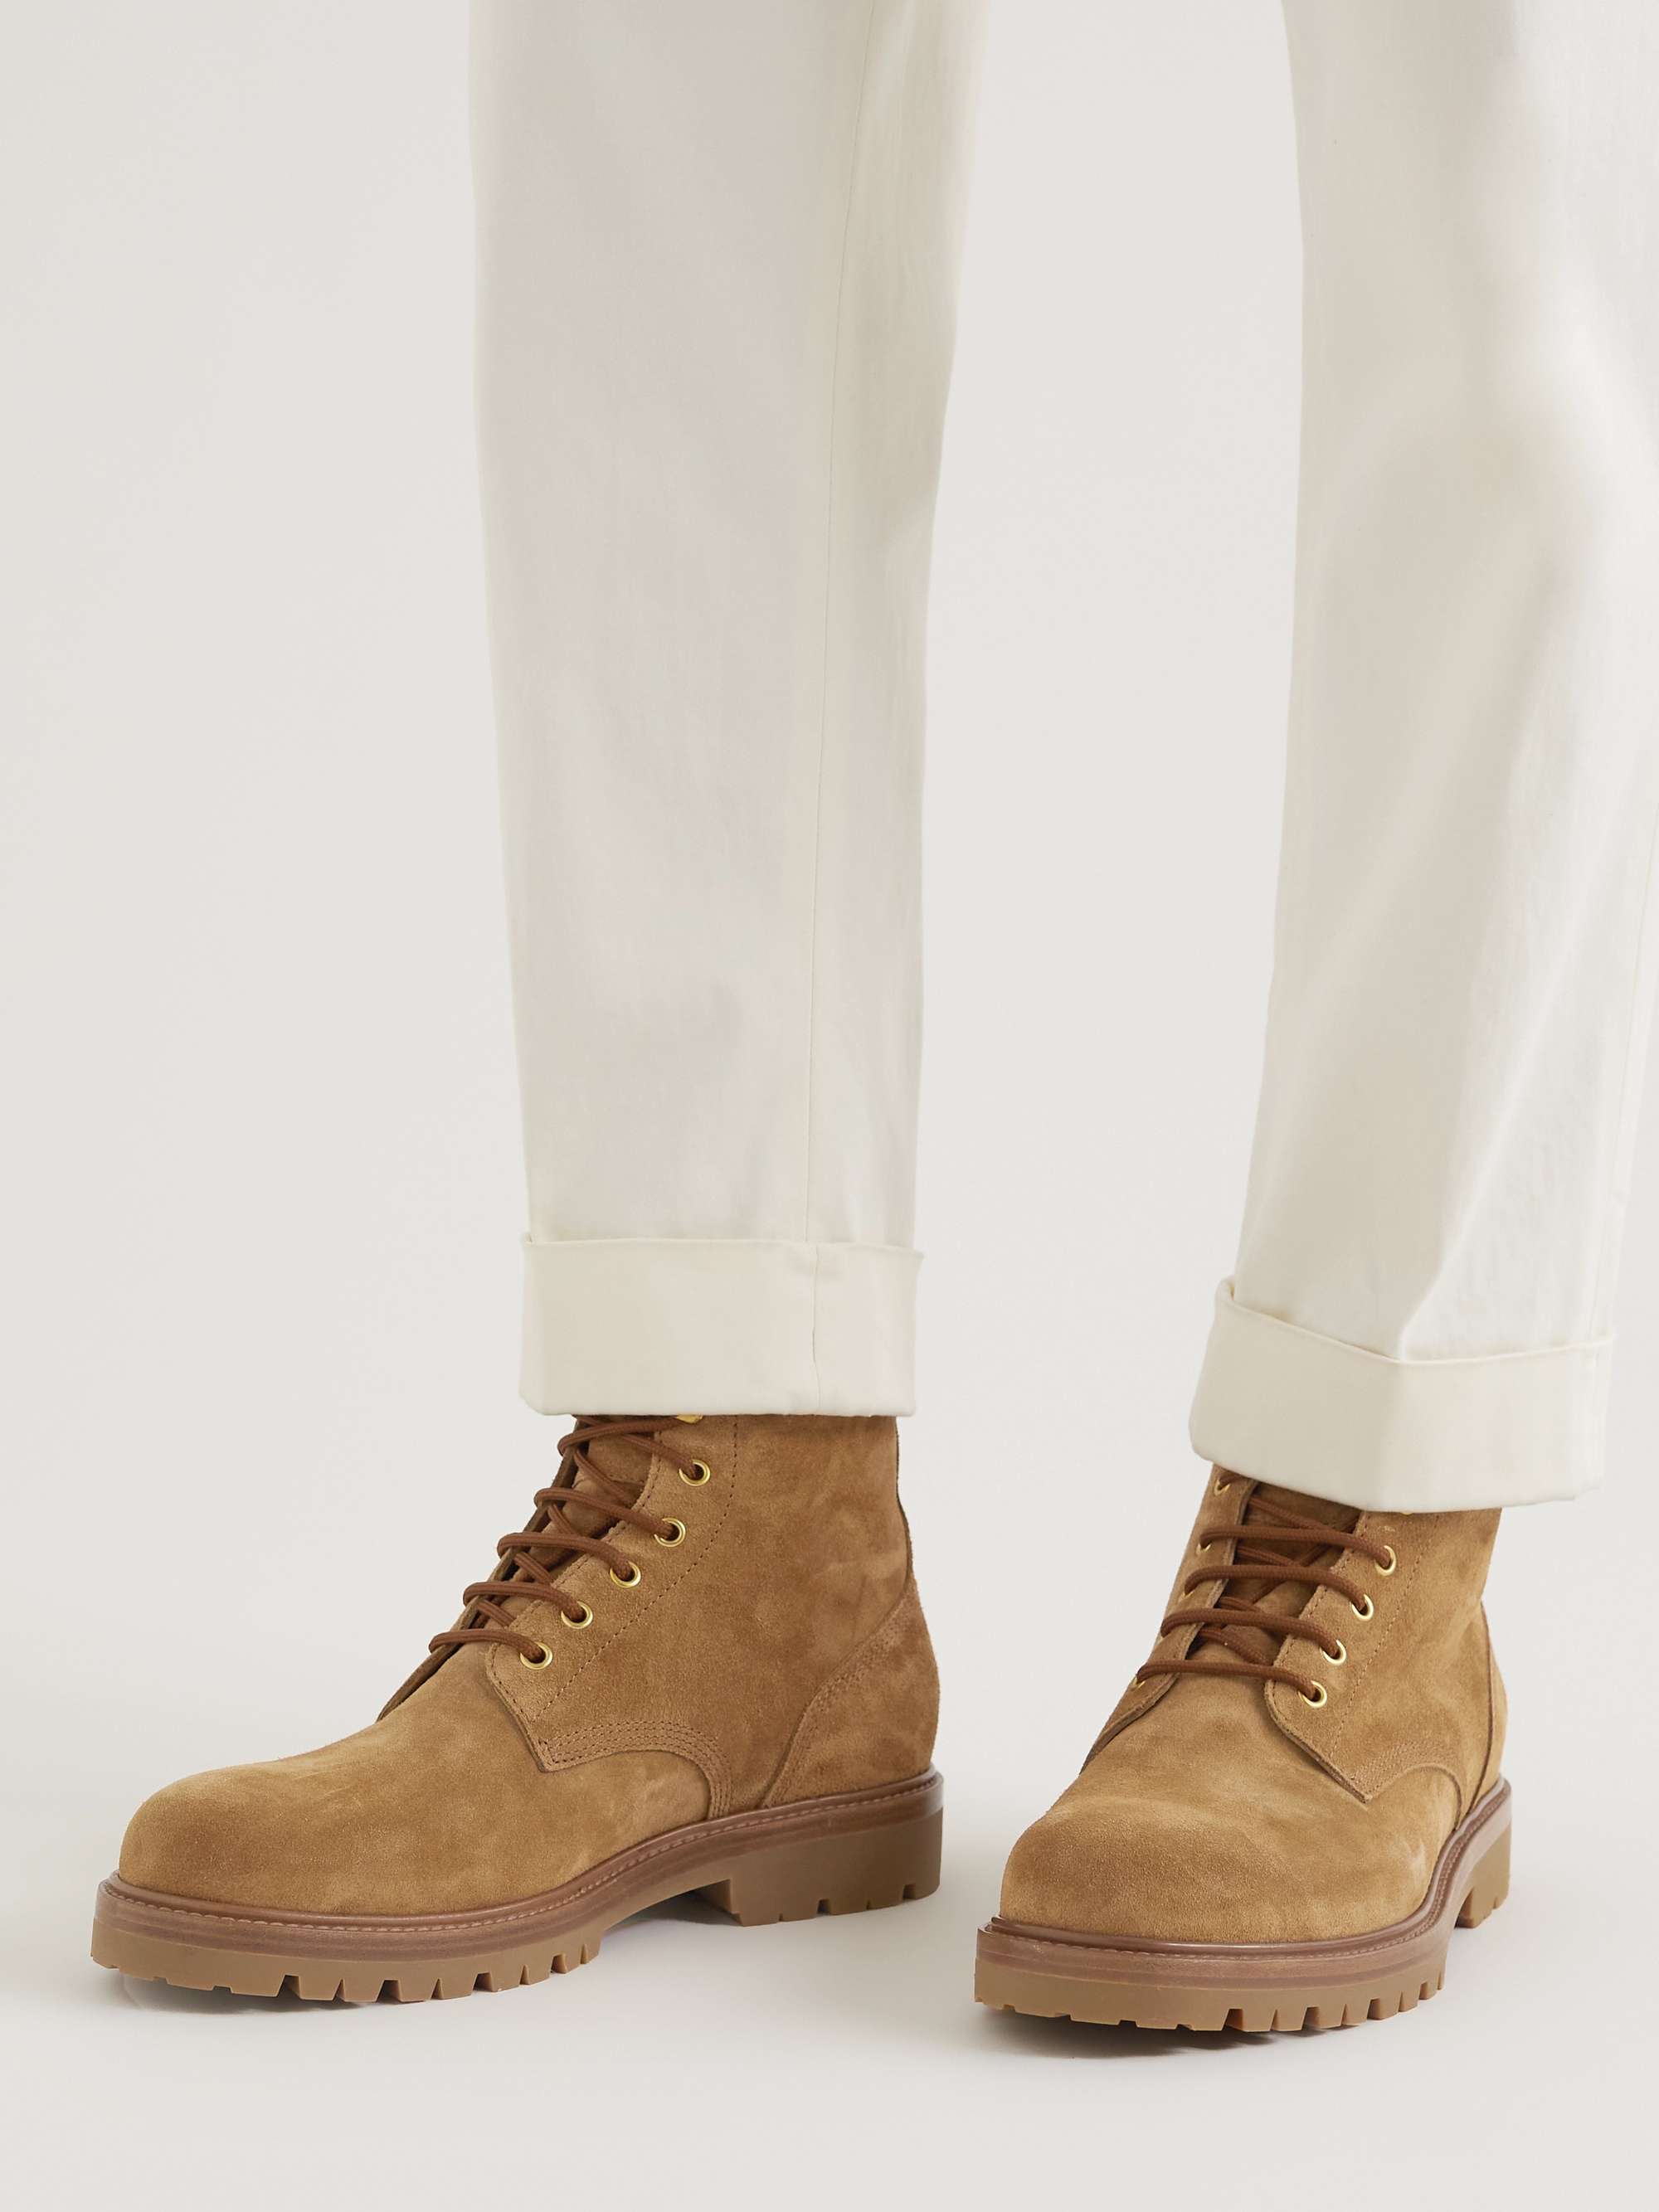 BRUNELLO CUCINELLI Perforated Leather-Trimmed Suede Boots